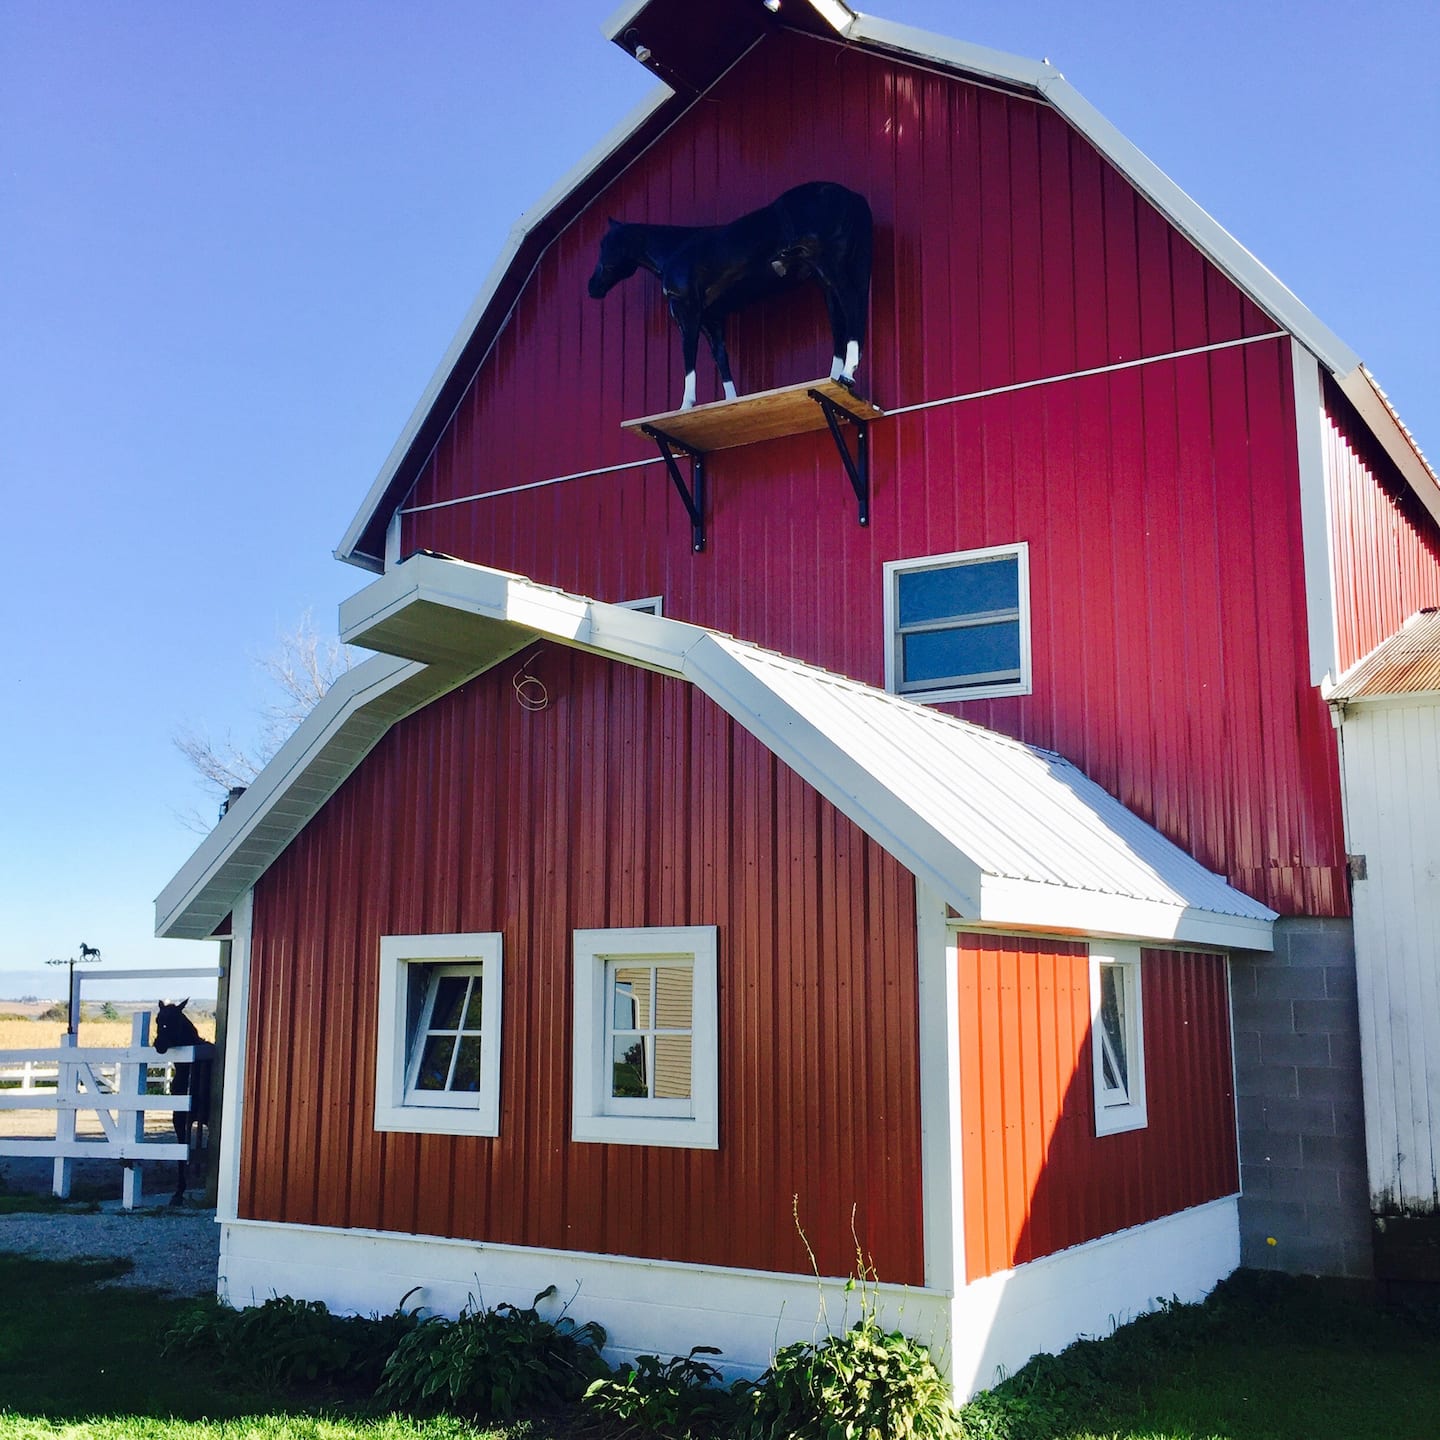 Silo on the ridge, one of the best Airbnbs in the United States